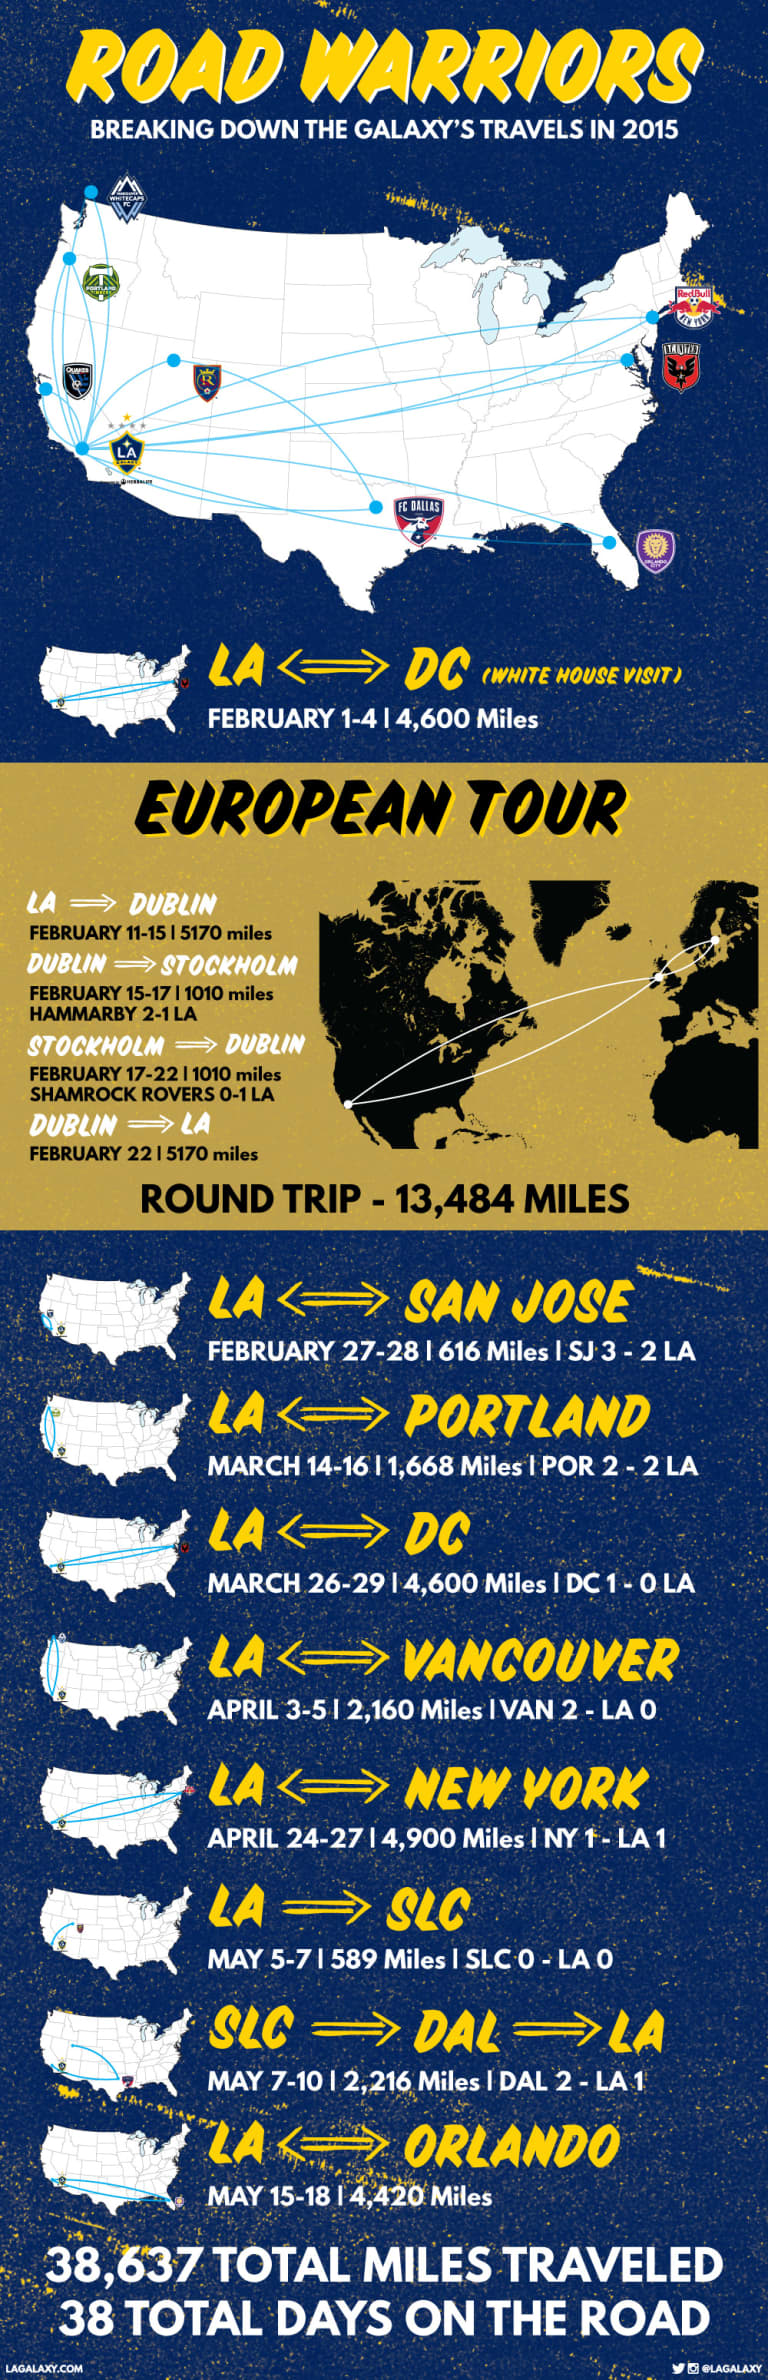 Infographic: LA Galaxy clocking up the miles in exhausting start to 2015 campaign -